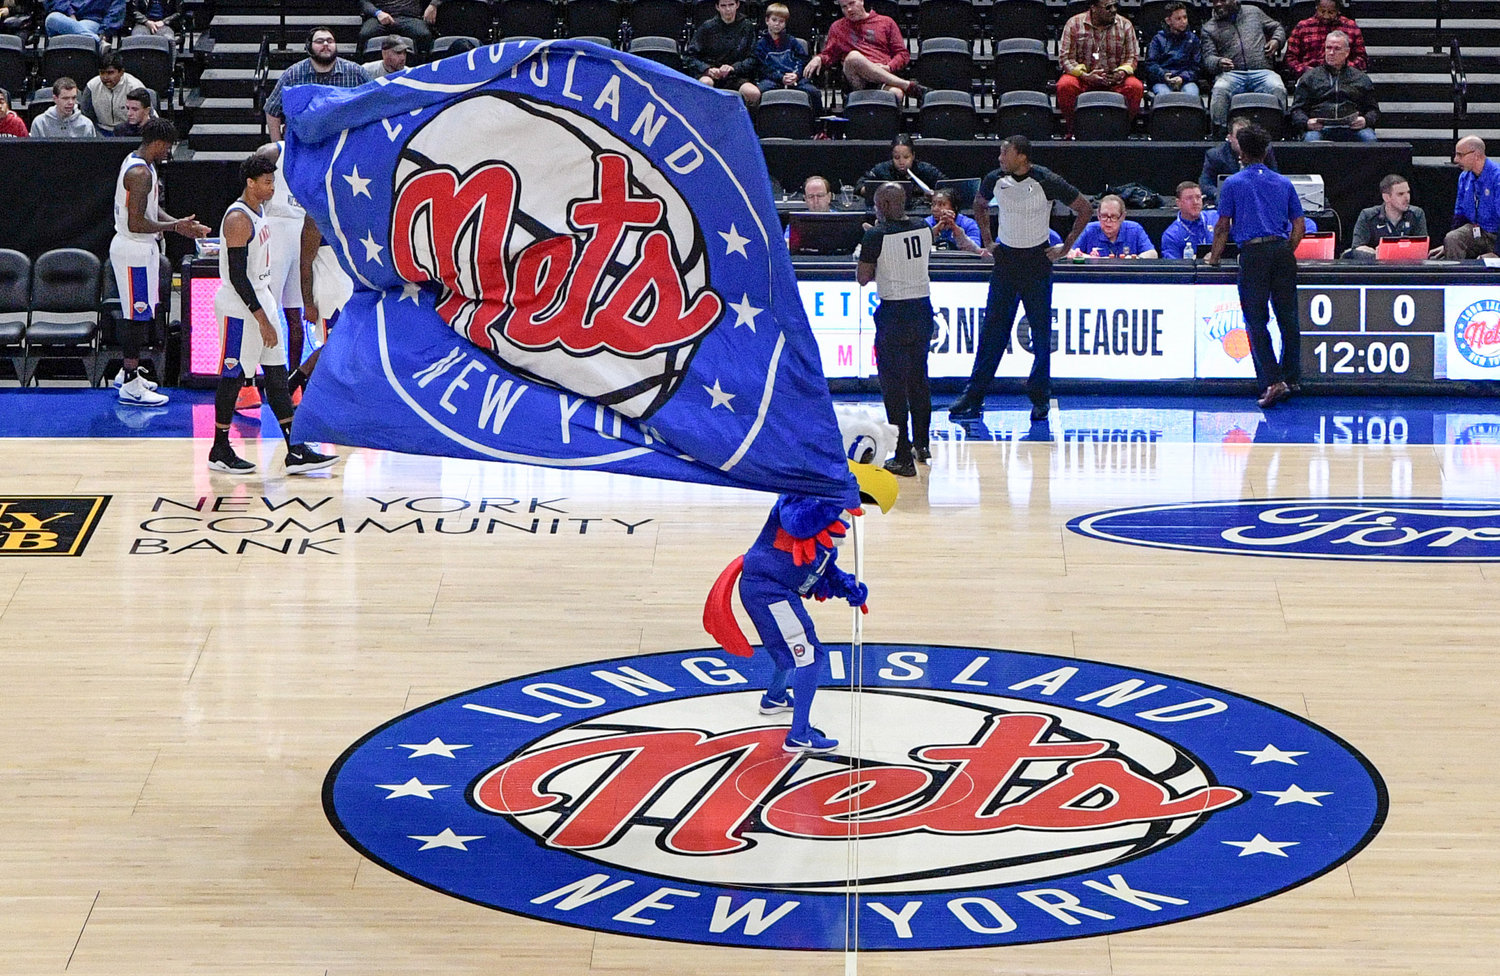 The Long Island Nets began the fourth season in franchise history last weekend and come off an exciting run to the G League finals.